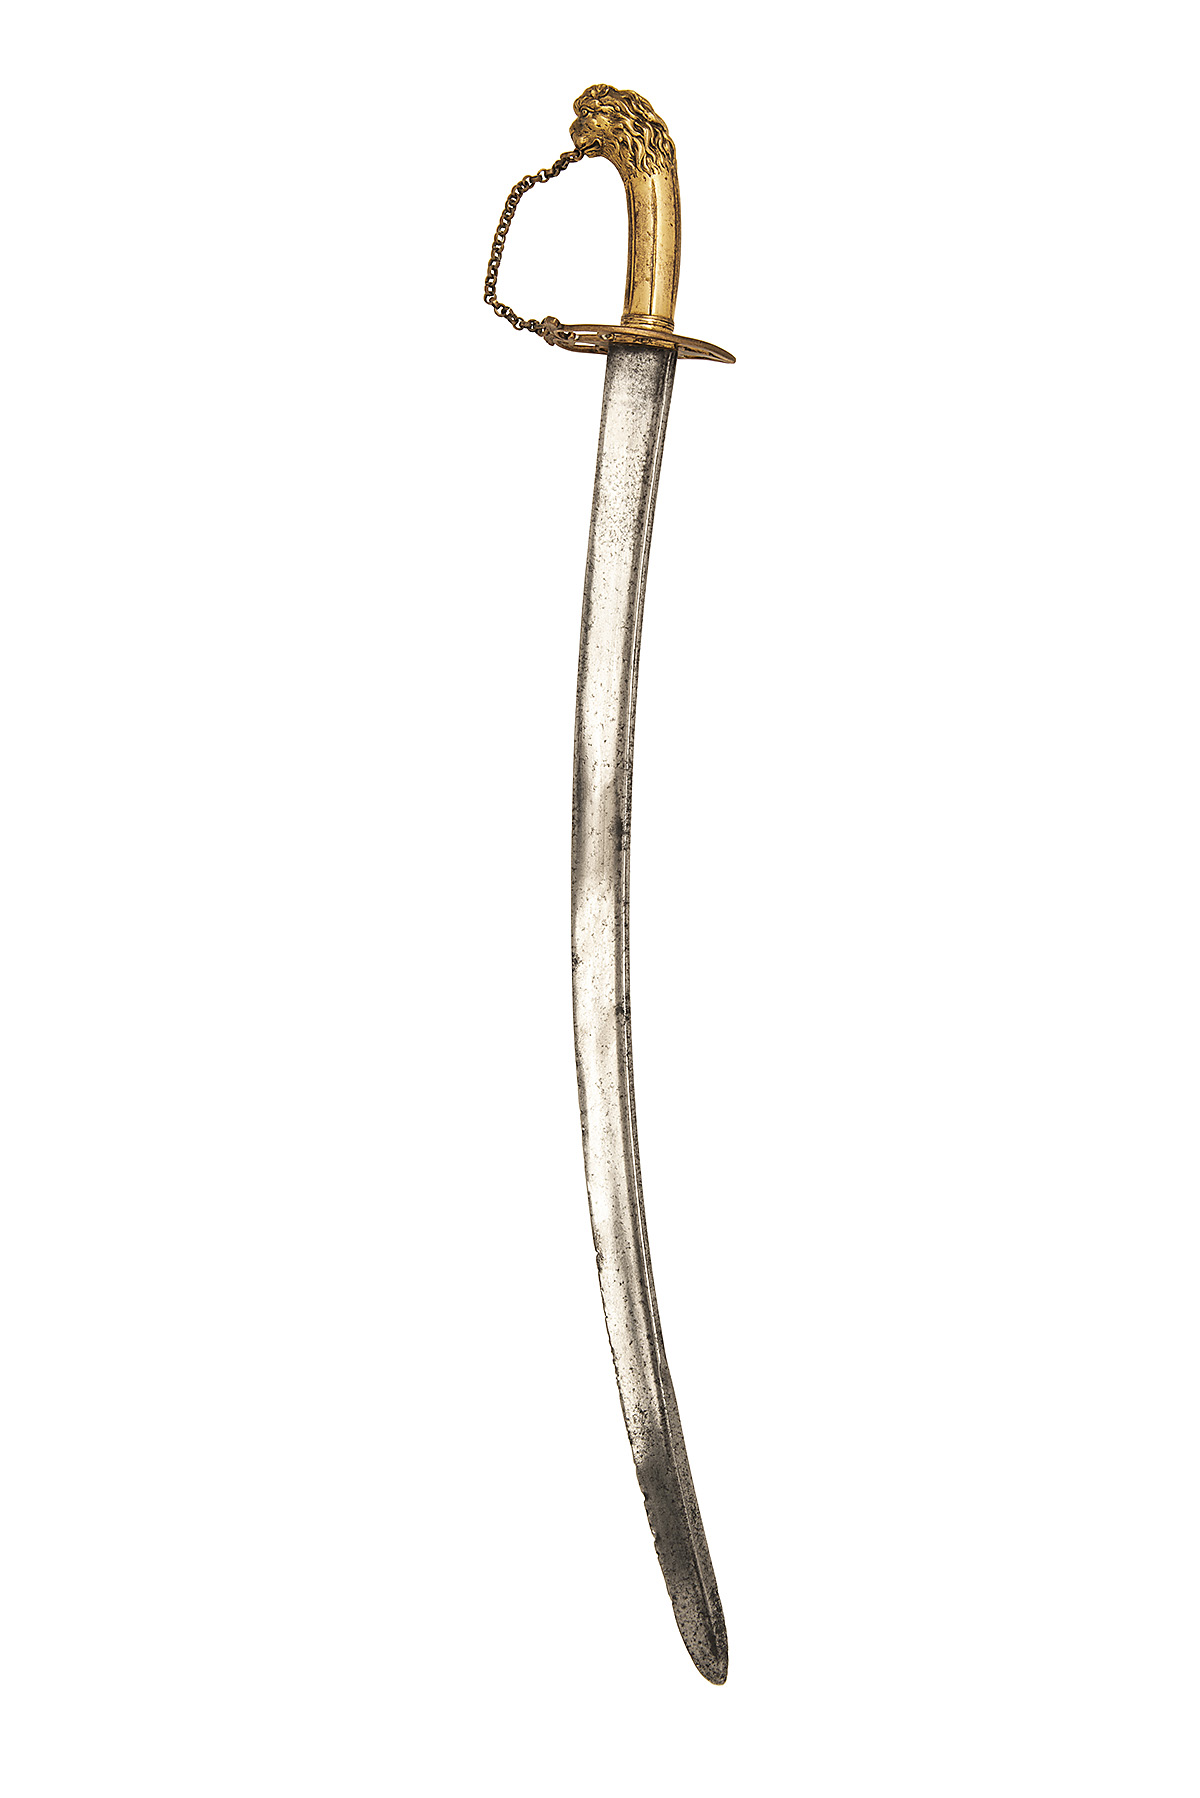 A BRITISH FLANK OFFICER'S SABRE WITH PIPE-BACKED BLADE circa 1785, with curved 29 1/2in. quill- - Image 2 of 4